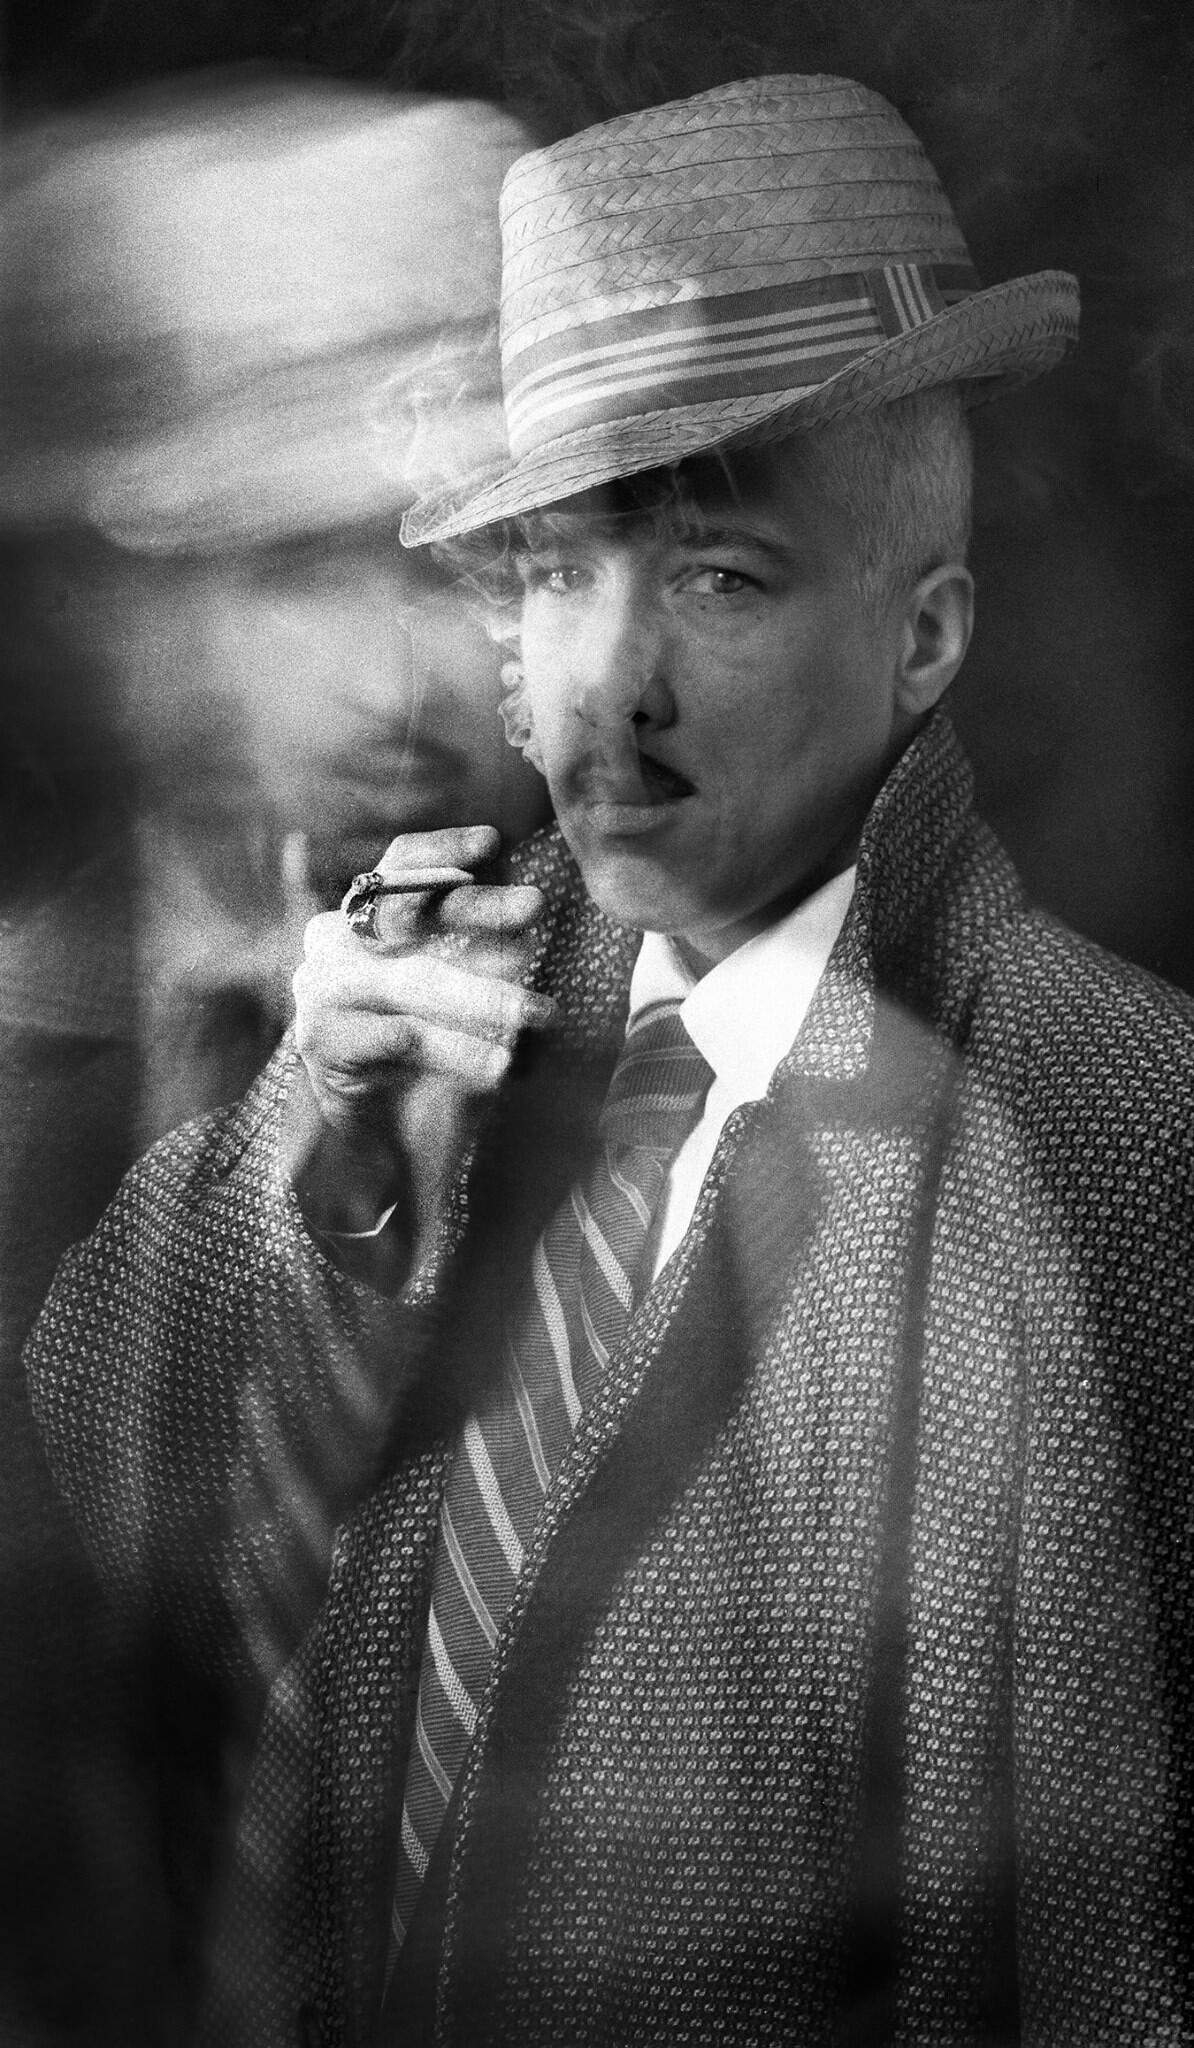 A blurred black and white portrait of a man in a suit smoking a pipe.